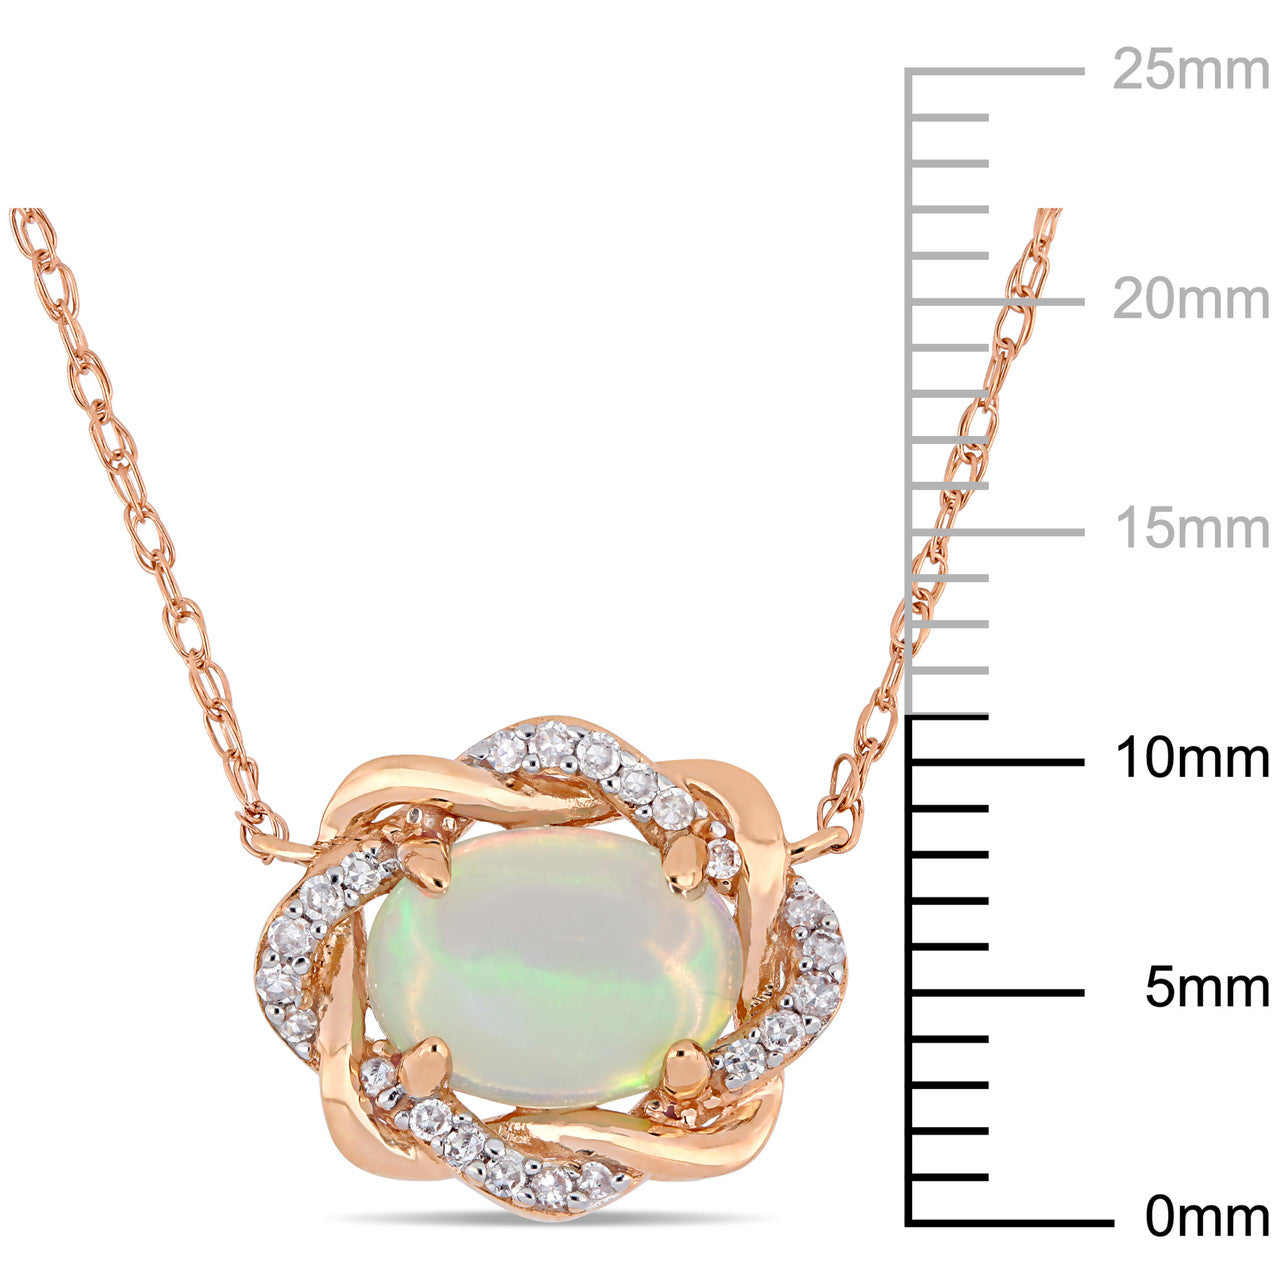 Ice Jewellery 3/4 CT TW Ethiopian Blue Opal And 1/10 CT TW Diamond Interlaced Halo Necklace In 10K Rose Gold - 75000006001 | Ice Jewellery Australia